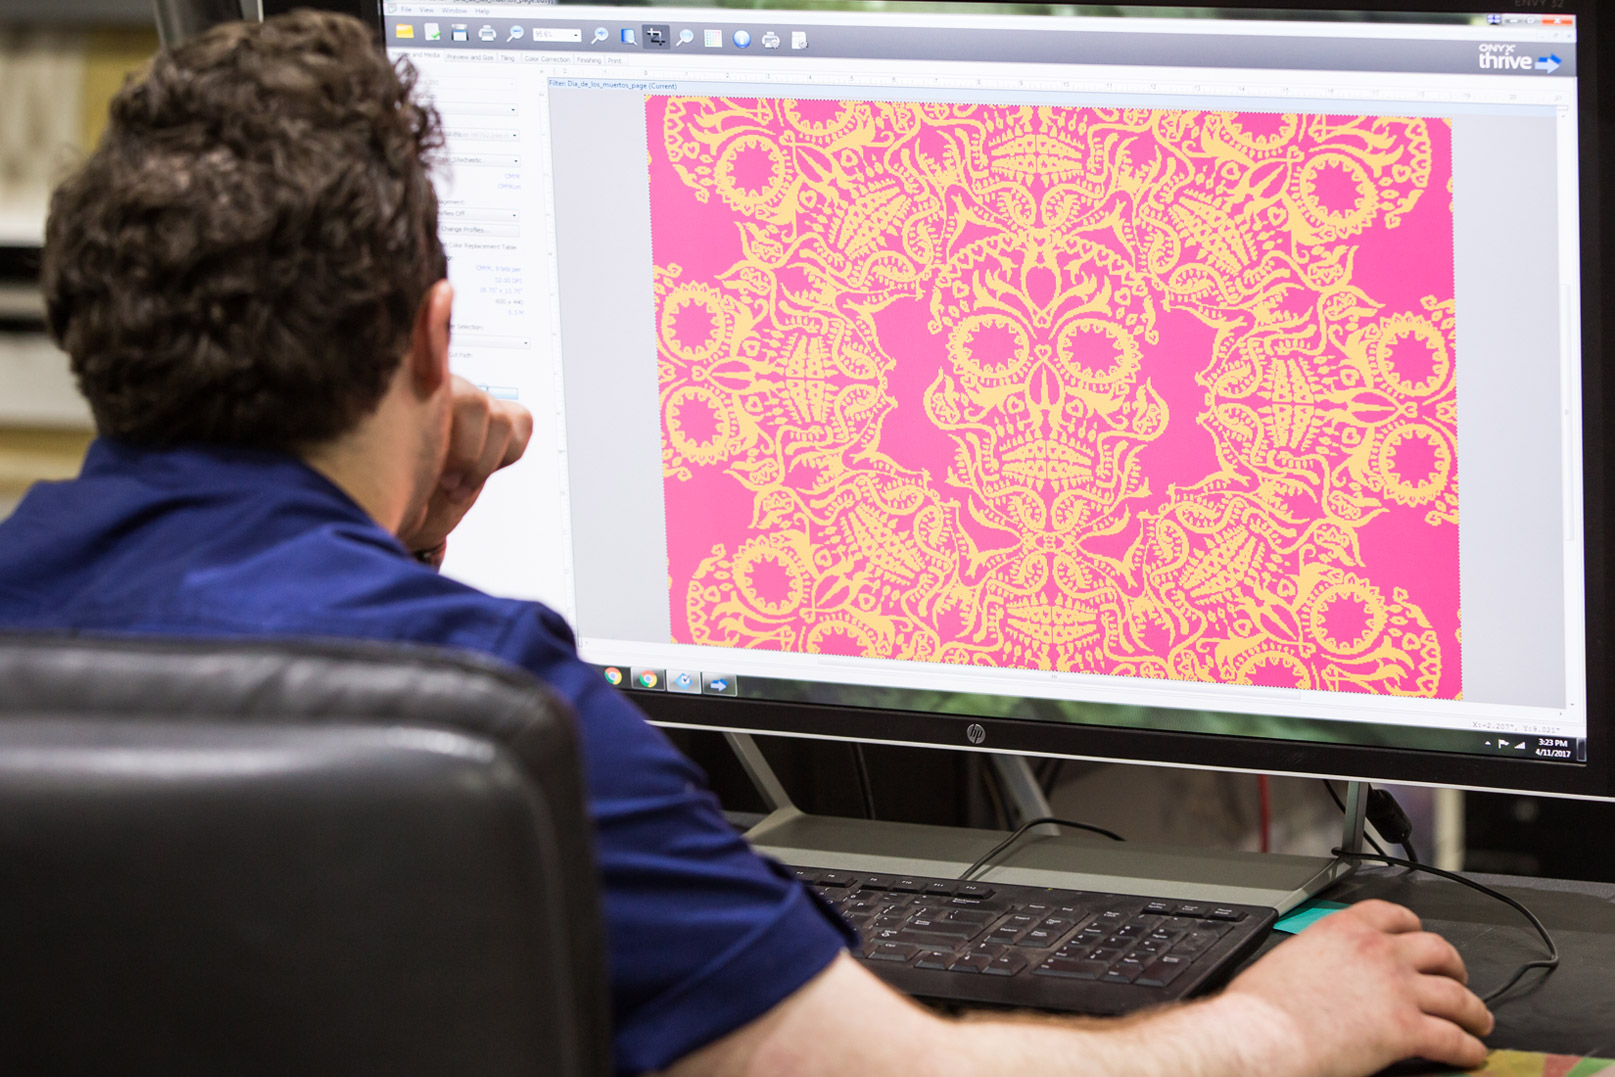 TPhoto of man working on computer displaying a colorful wallpaper pattern.